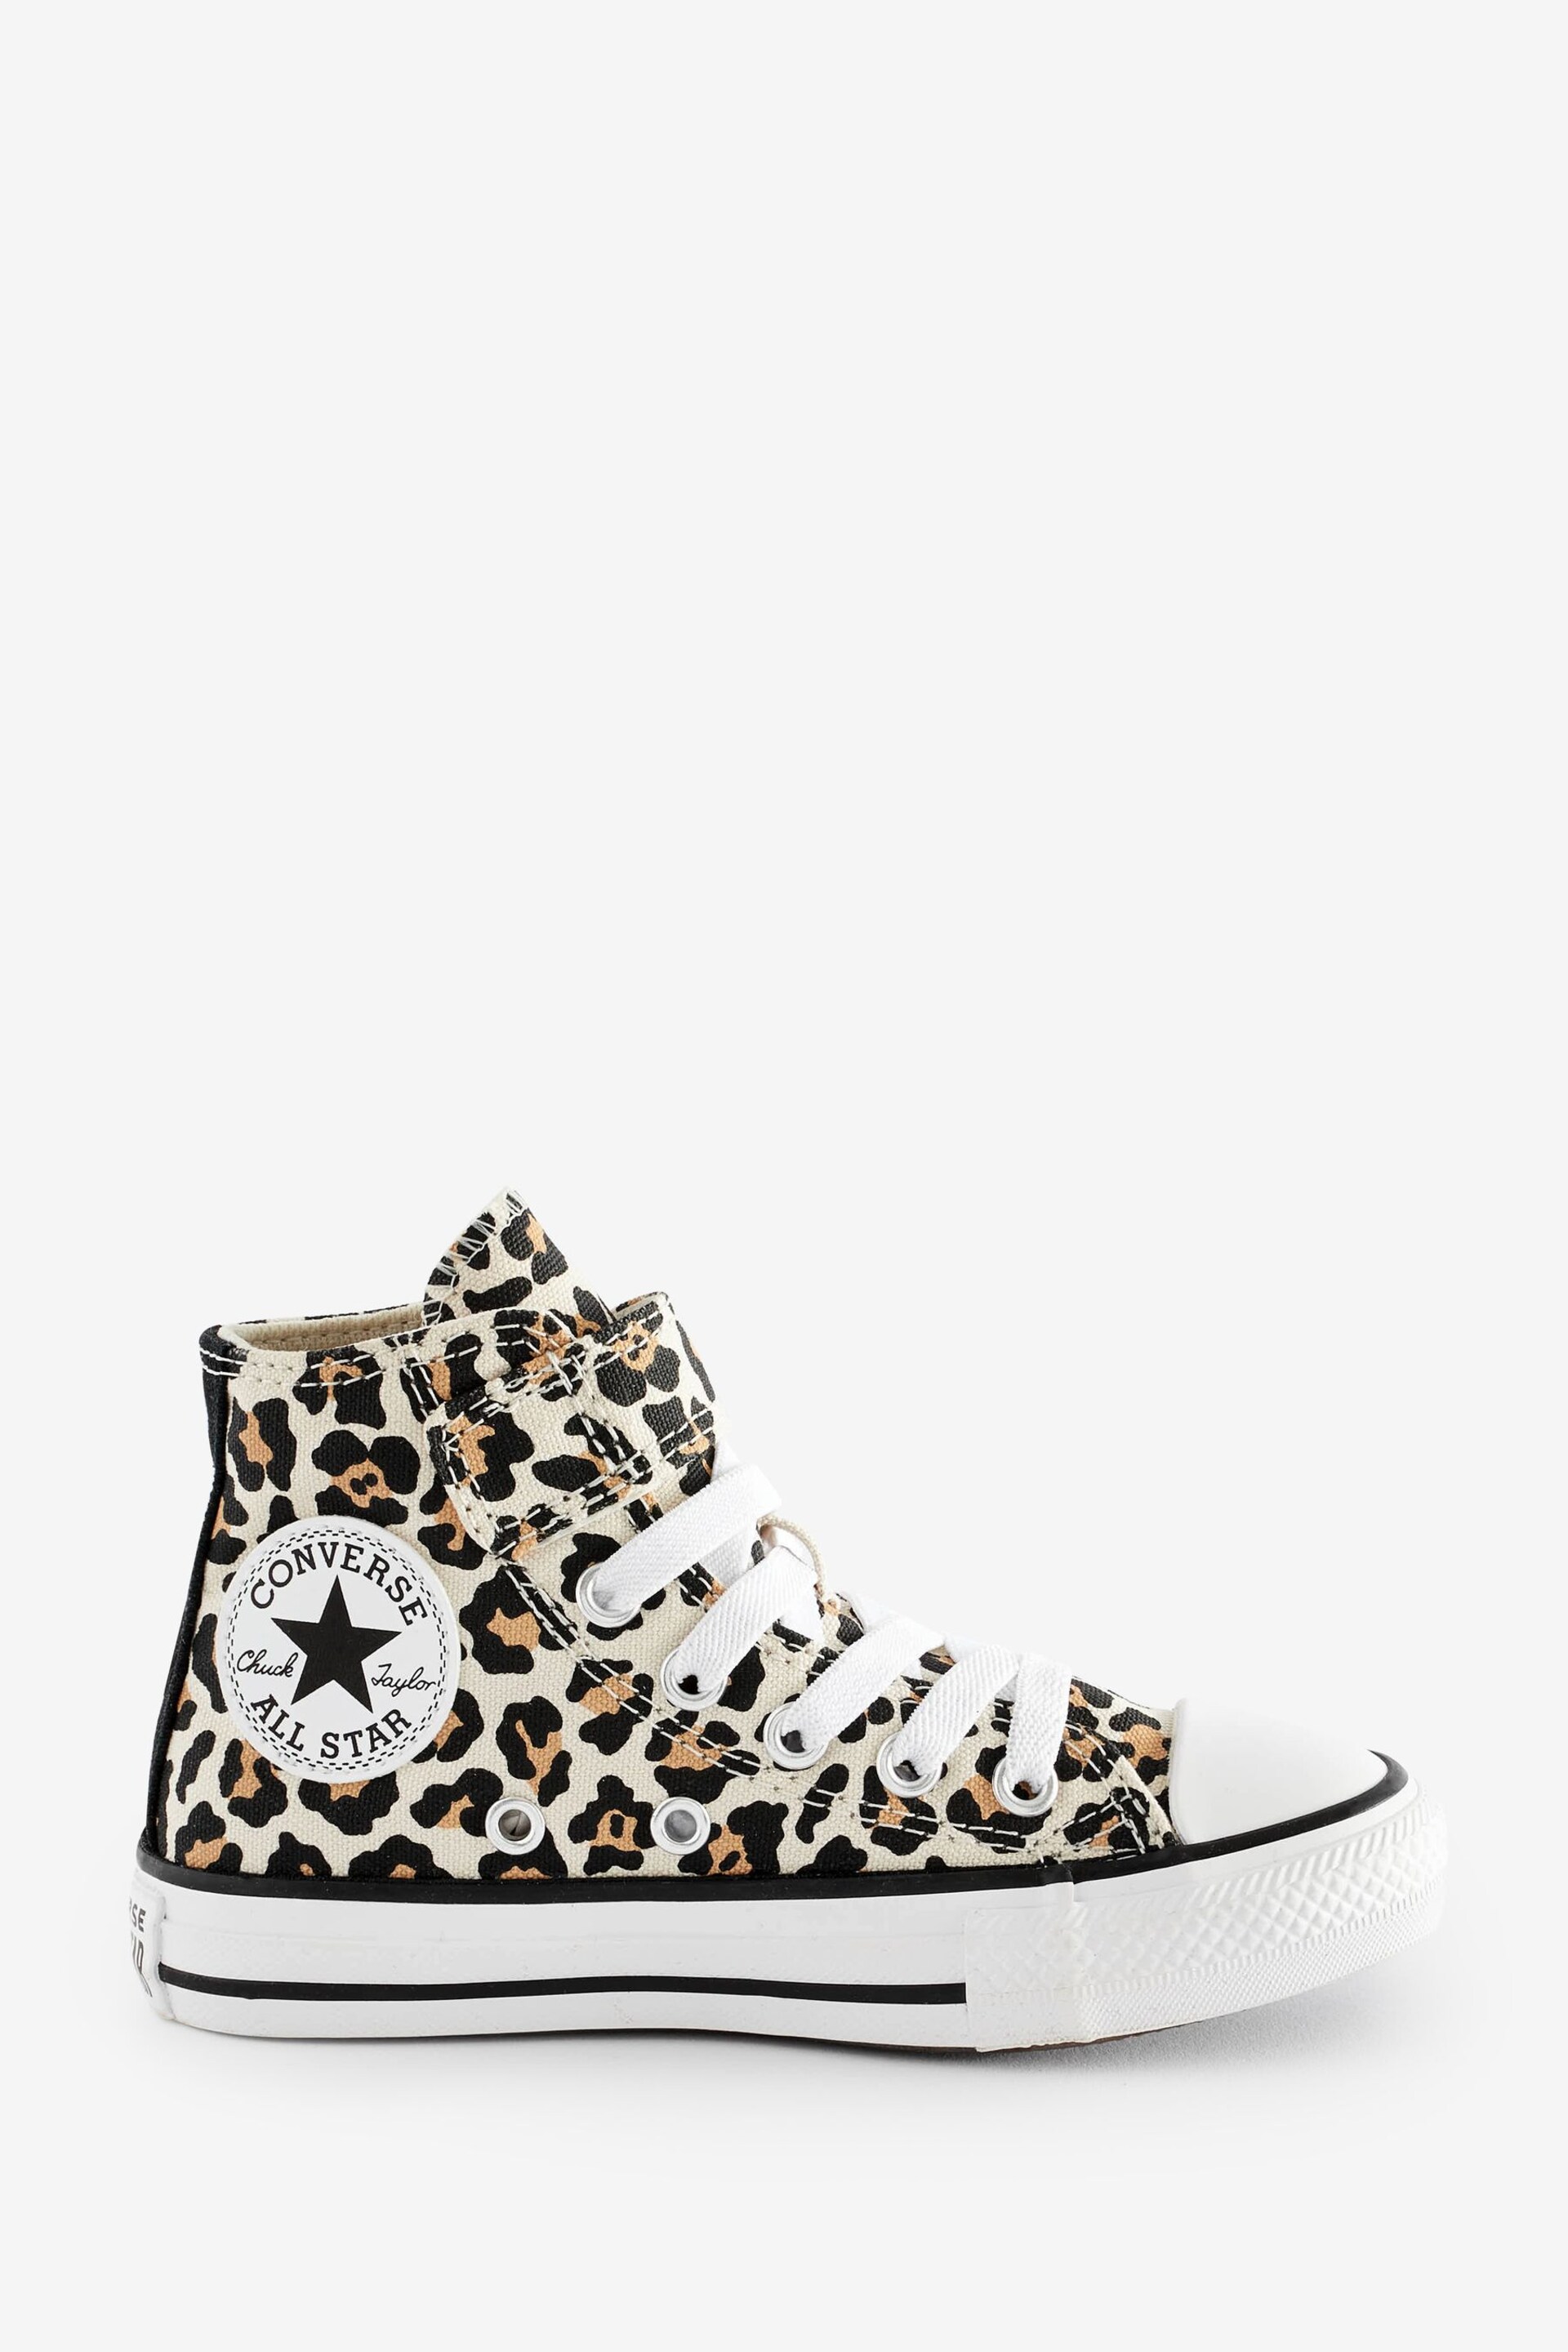 Converse Leopard Print Junior All Star 1V Easy On Trainers - Image 1 of 9